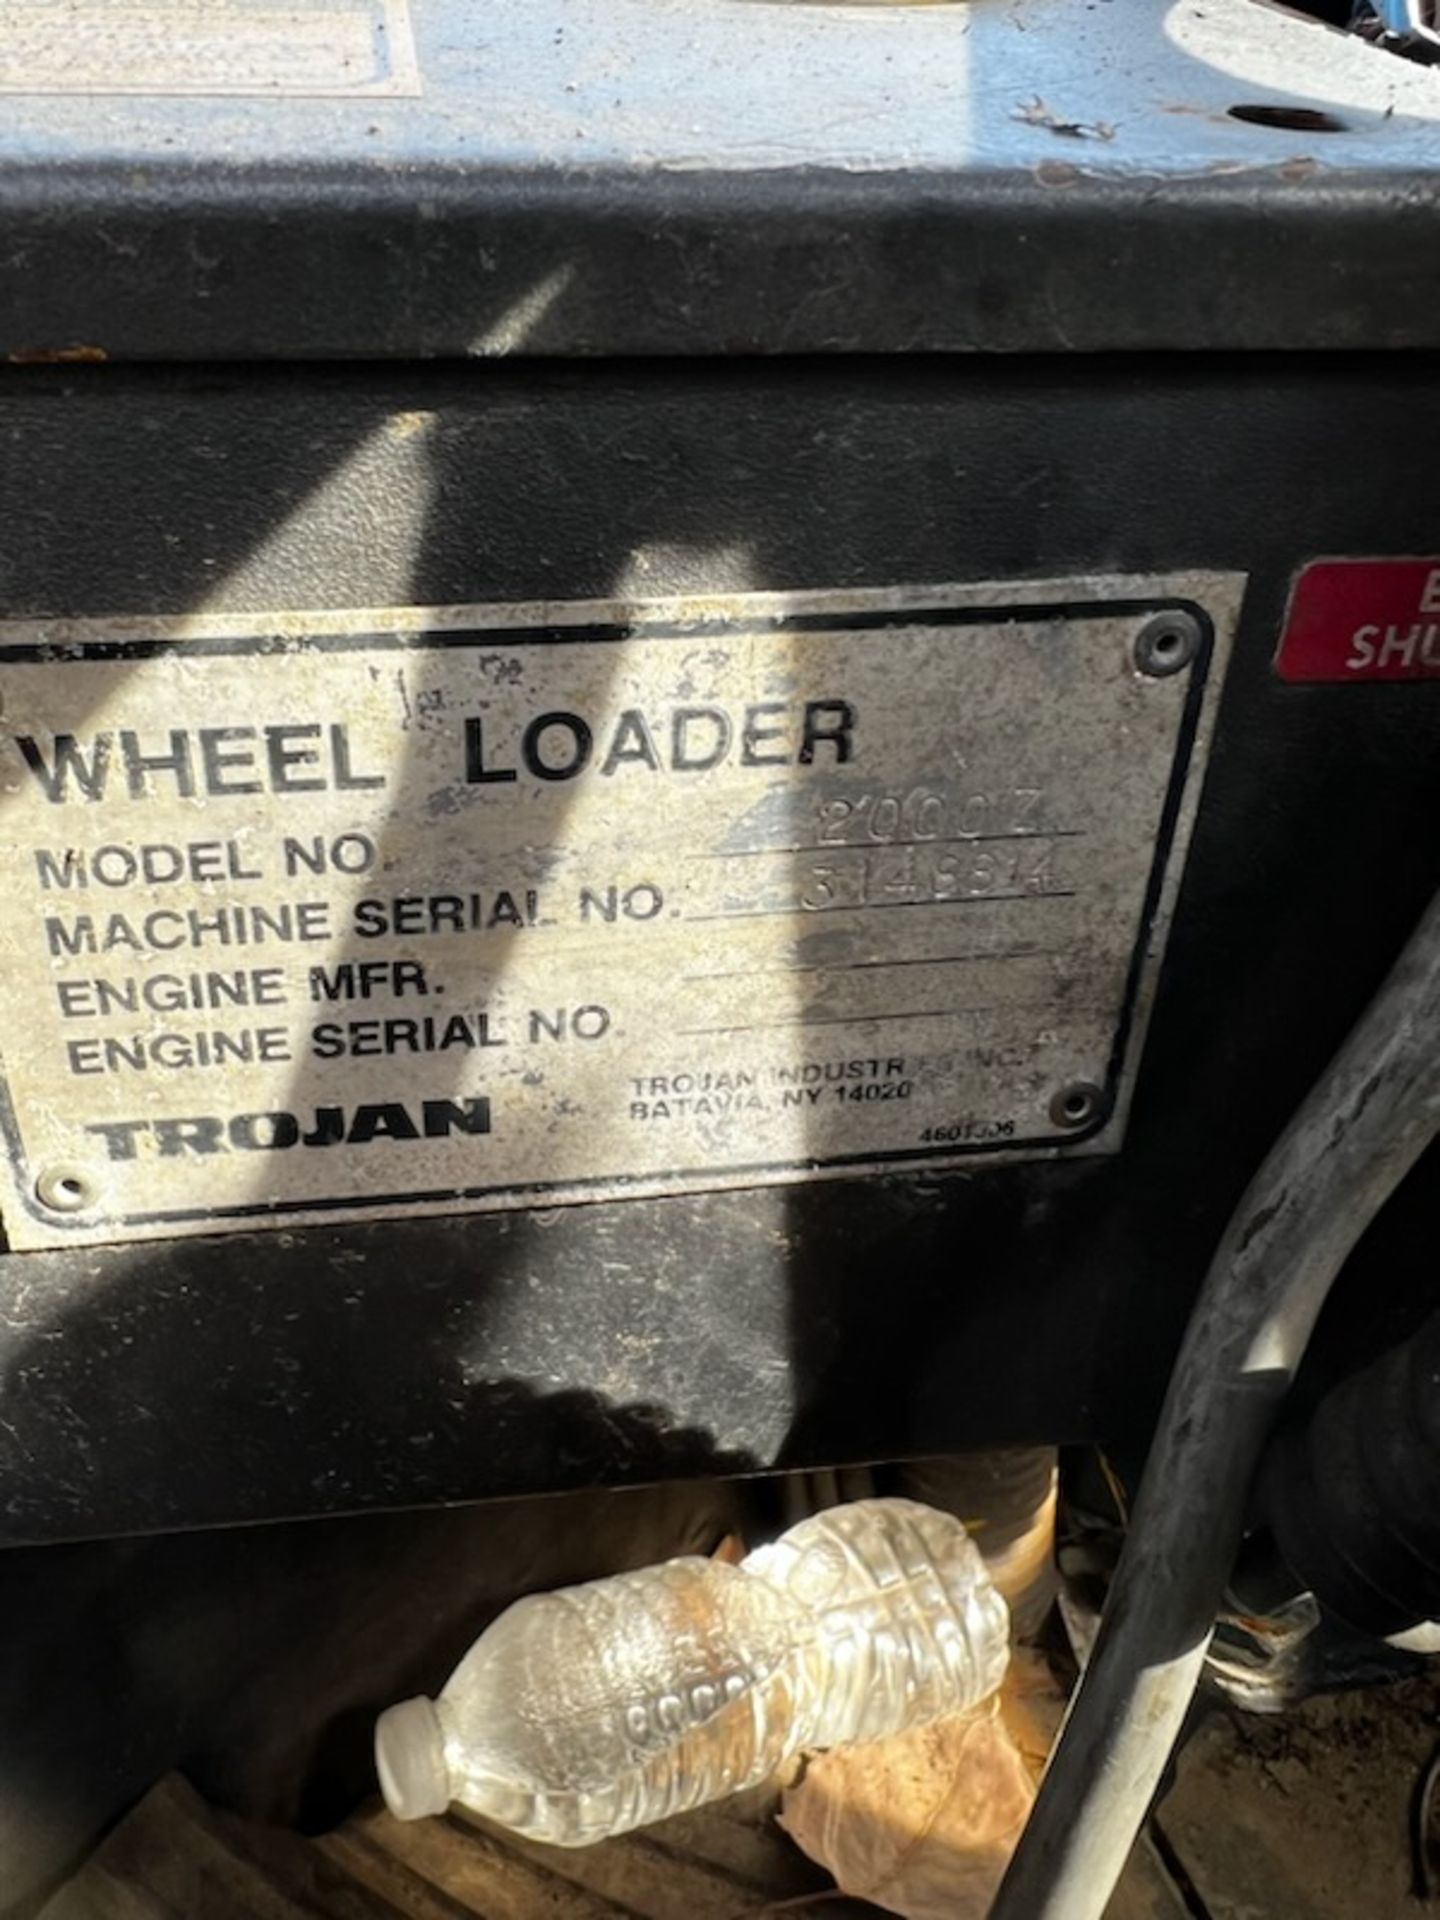 (MACHINE RUNS) Trojan 2000Z Articulating Front End Loader, SN 3148814, NO BRAKES, NO LOW GEAR Locate - Image 4 of 4